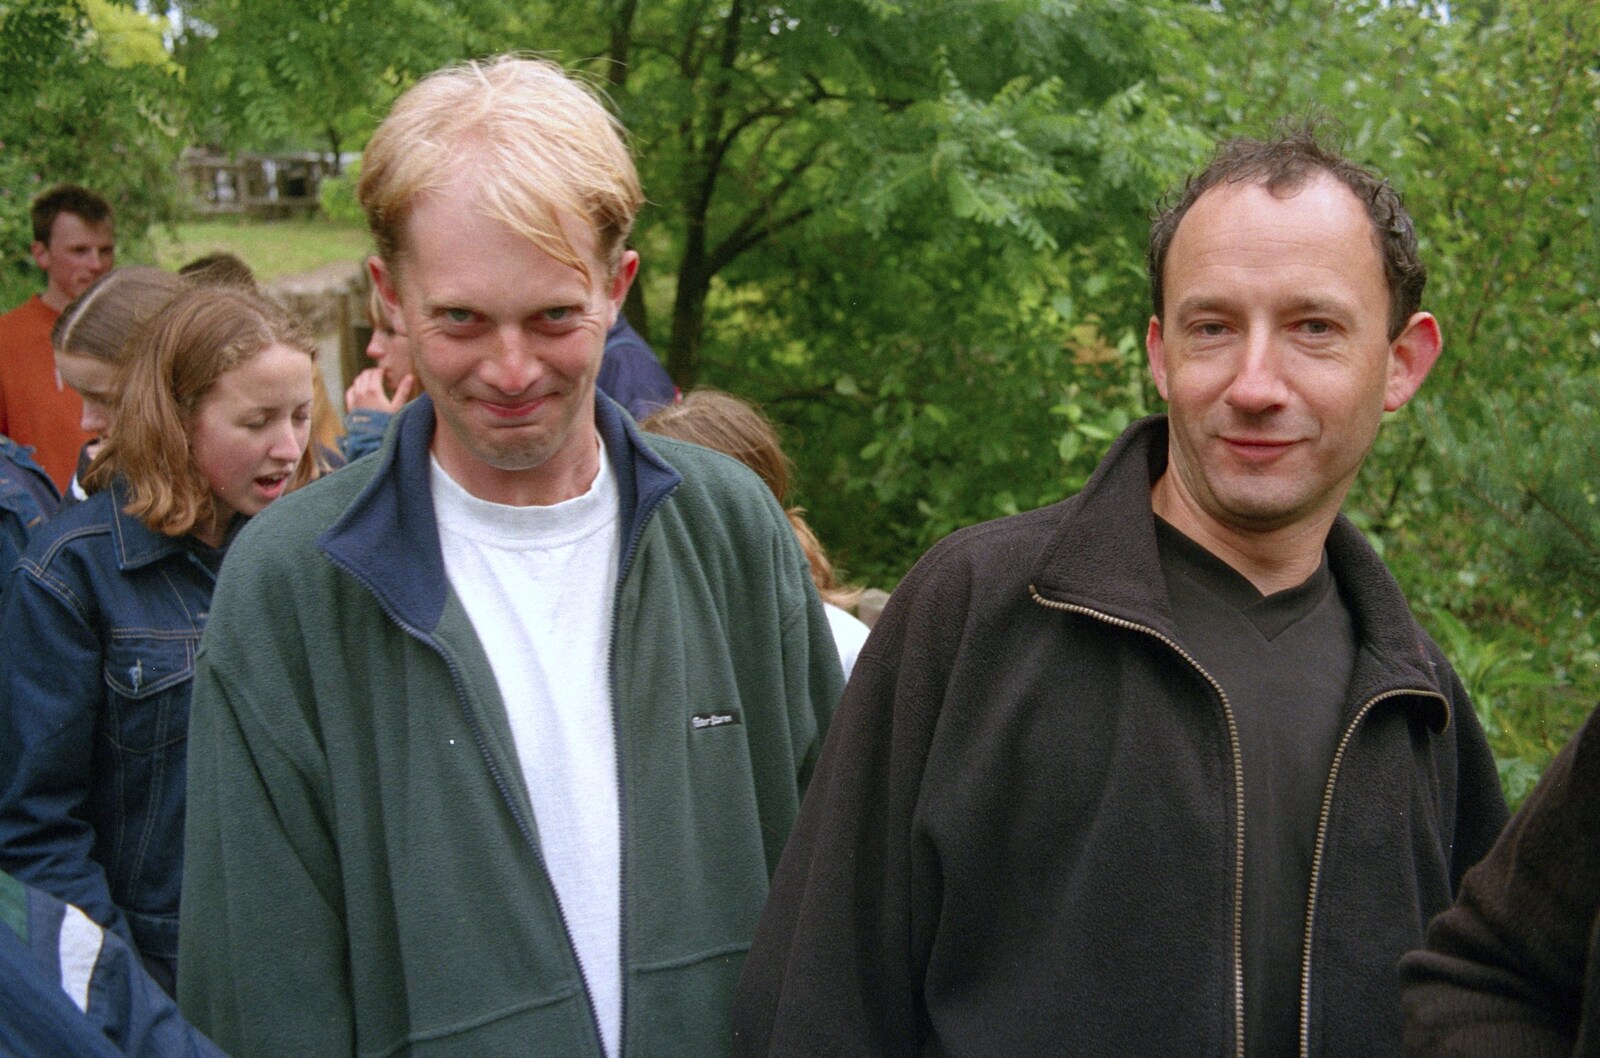 A Trip to Alton Towers, Staffordshire - 15th June 2000: Paul and DH queue up for the rapids